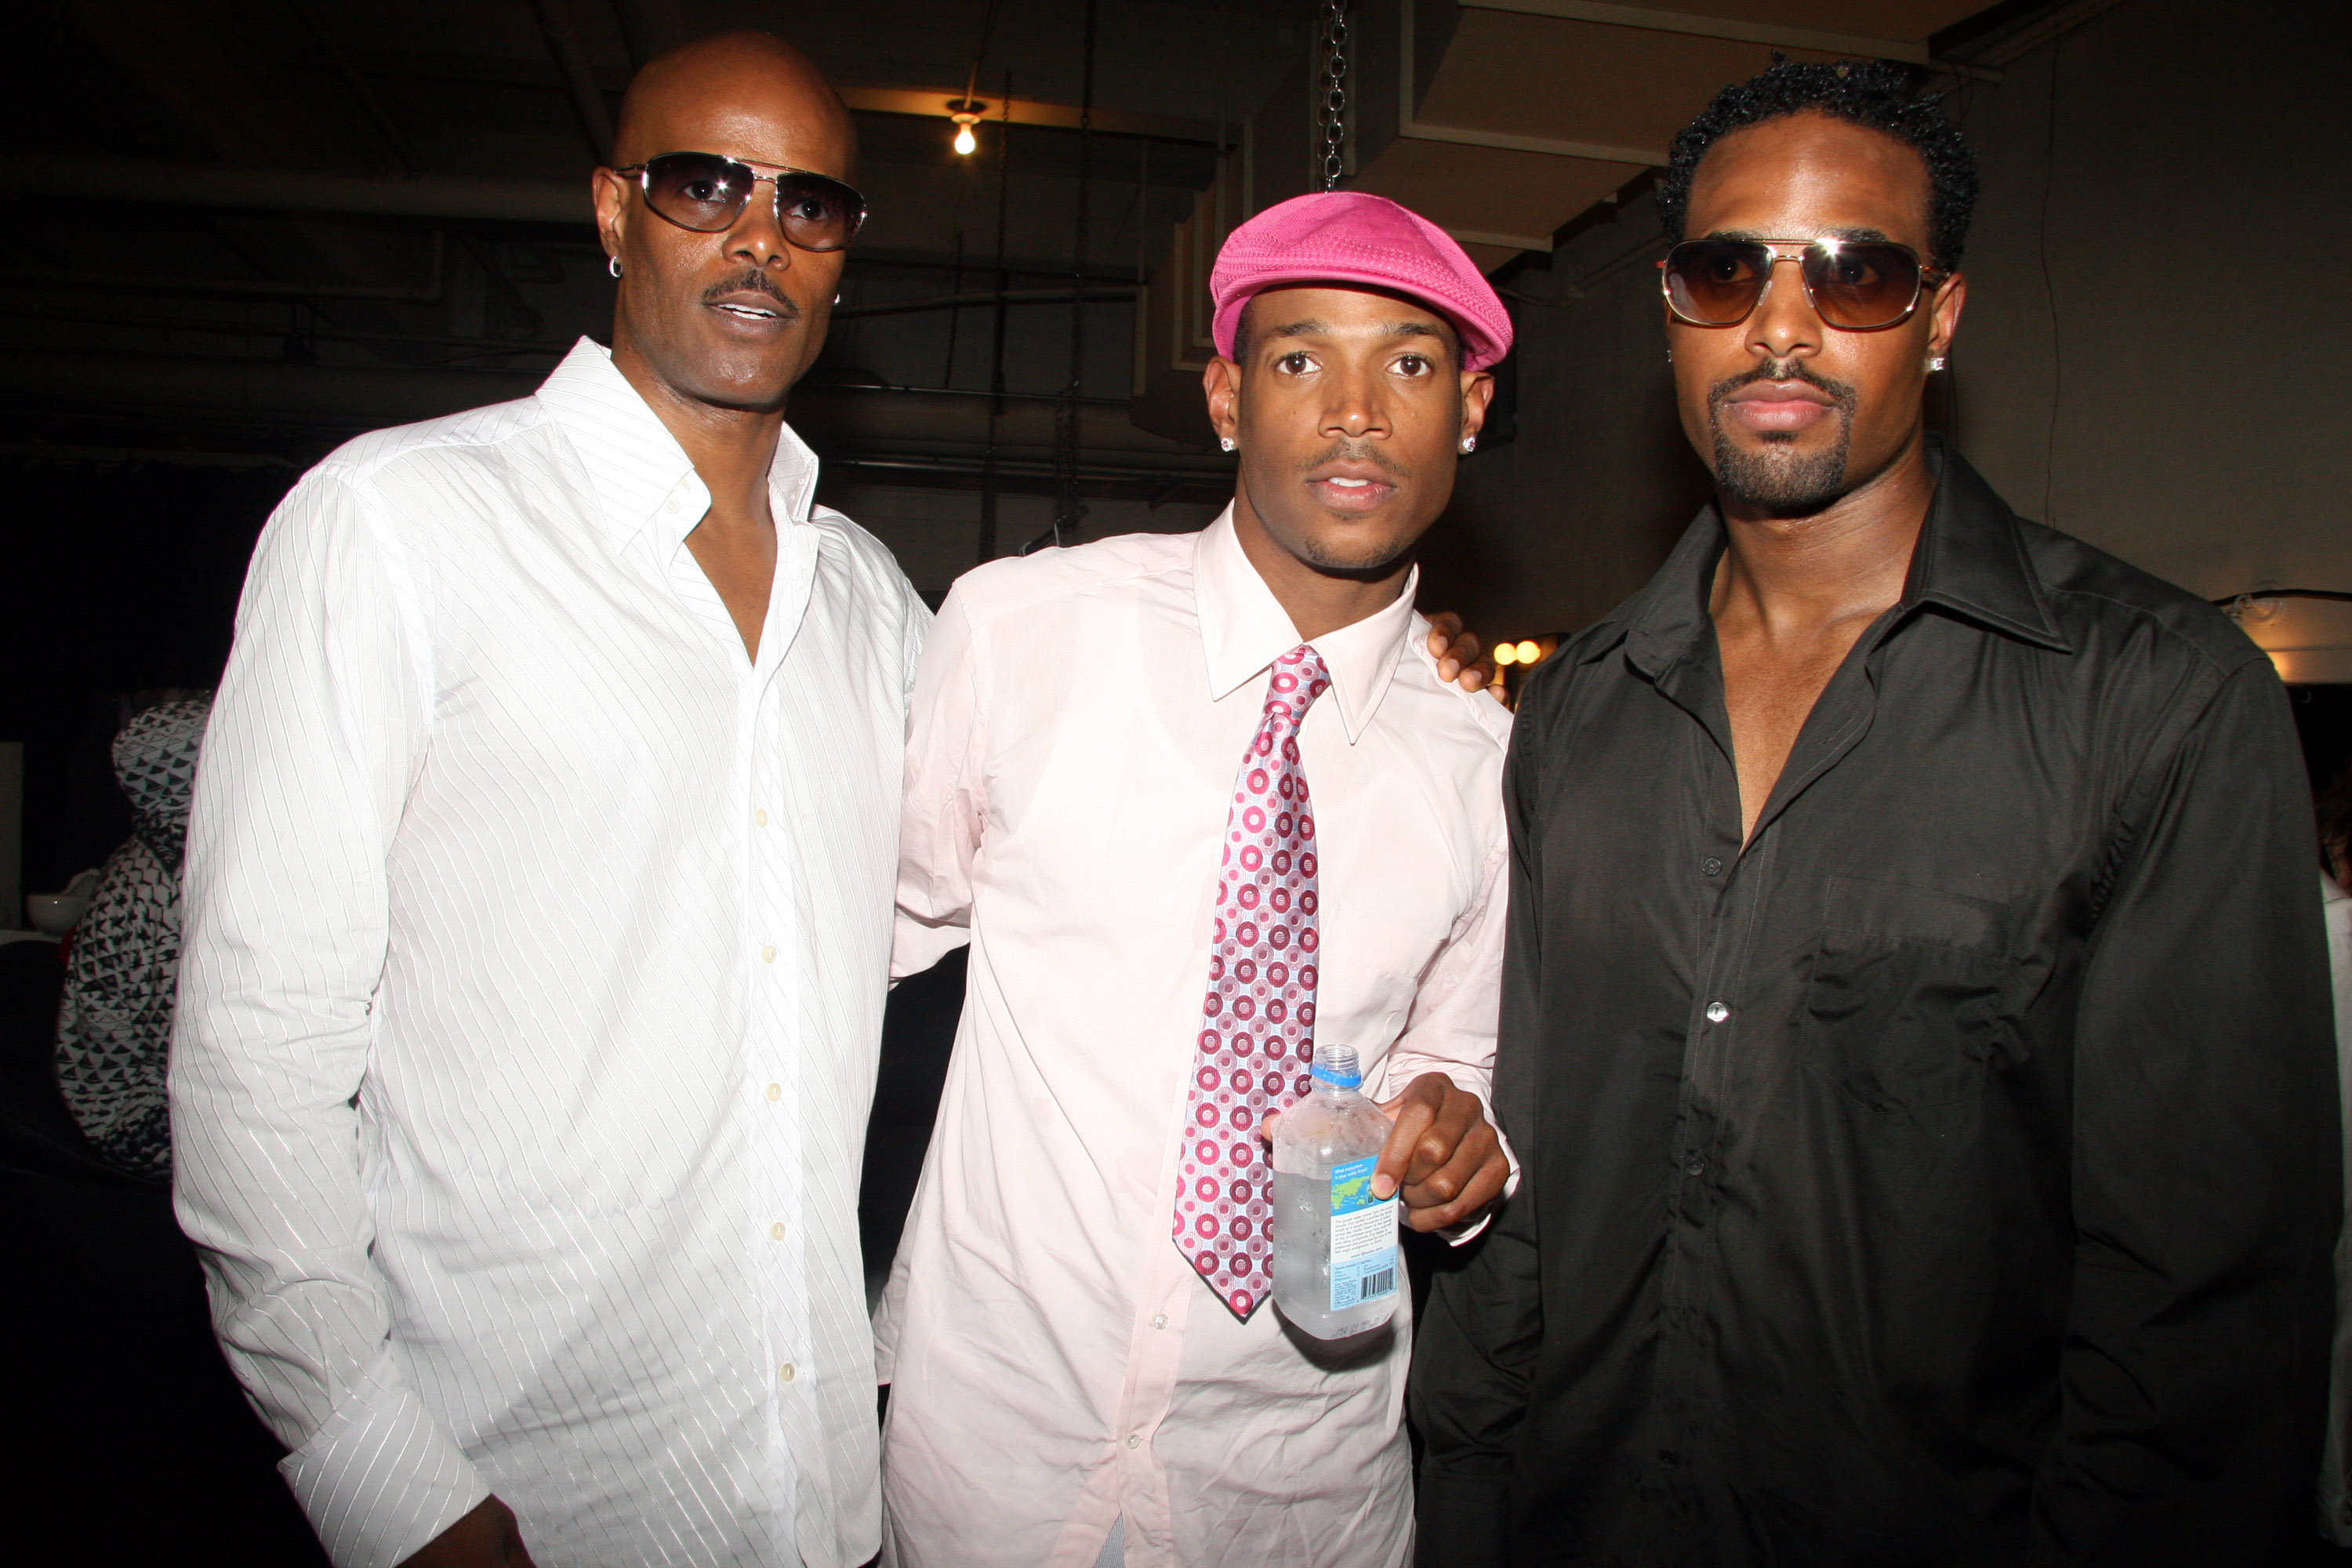 Keenen Ivory Wayans, Marlon Wayans, and Shawn Wayans at 6th Annual BET Awards on June 27, 2006. | Source: Getty Images